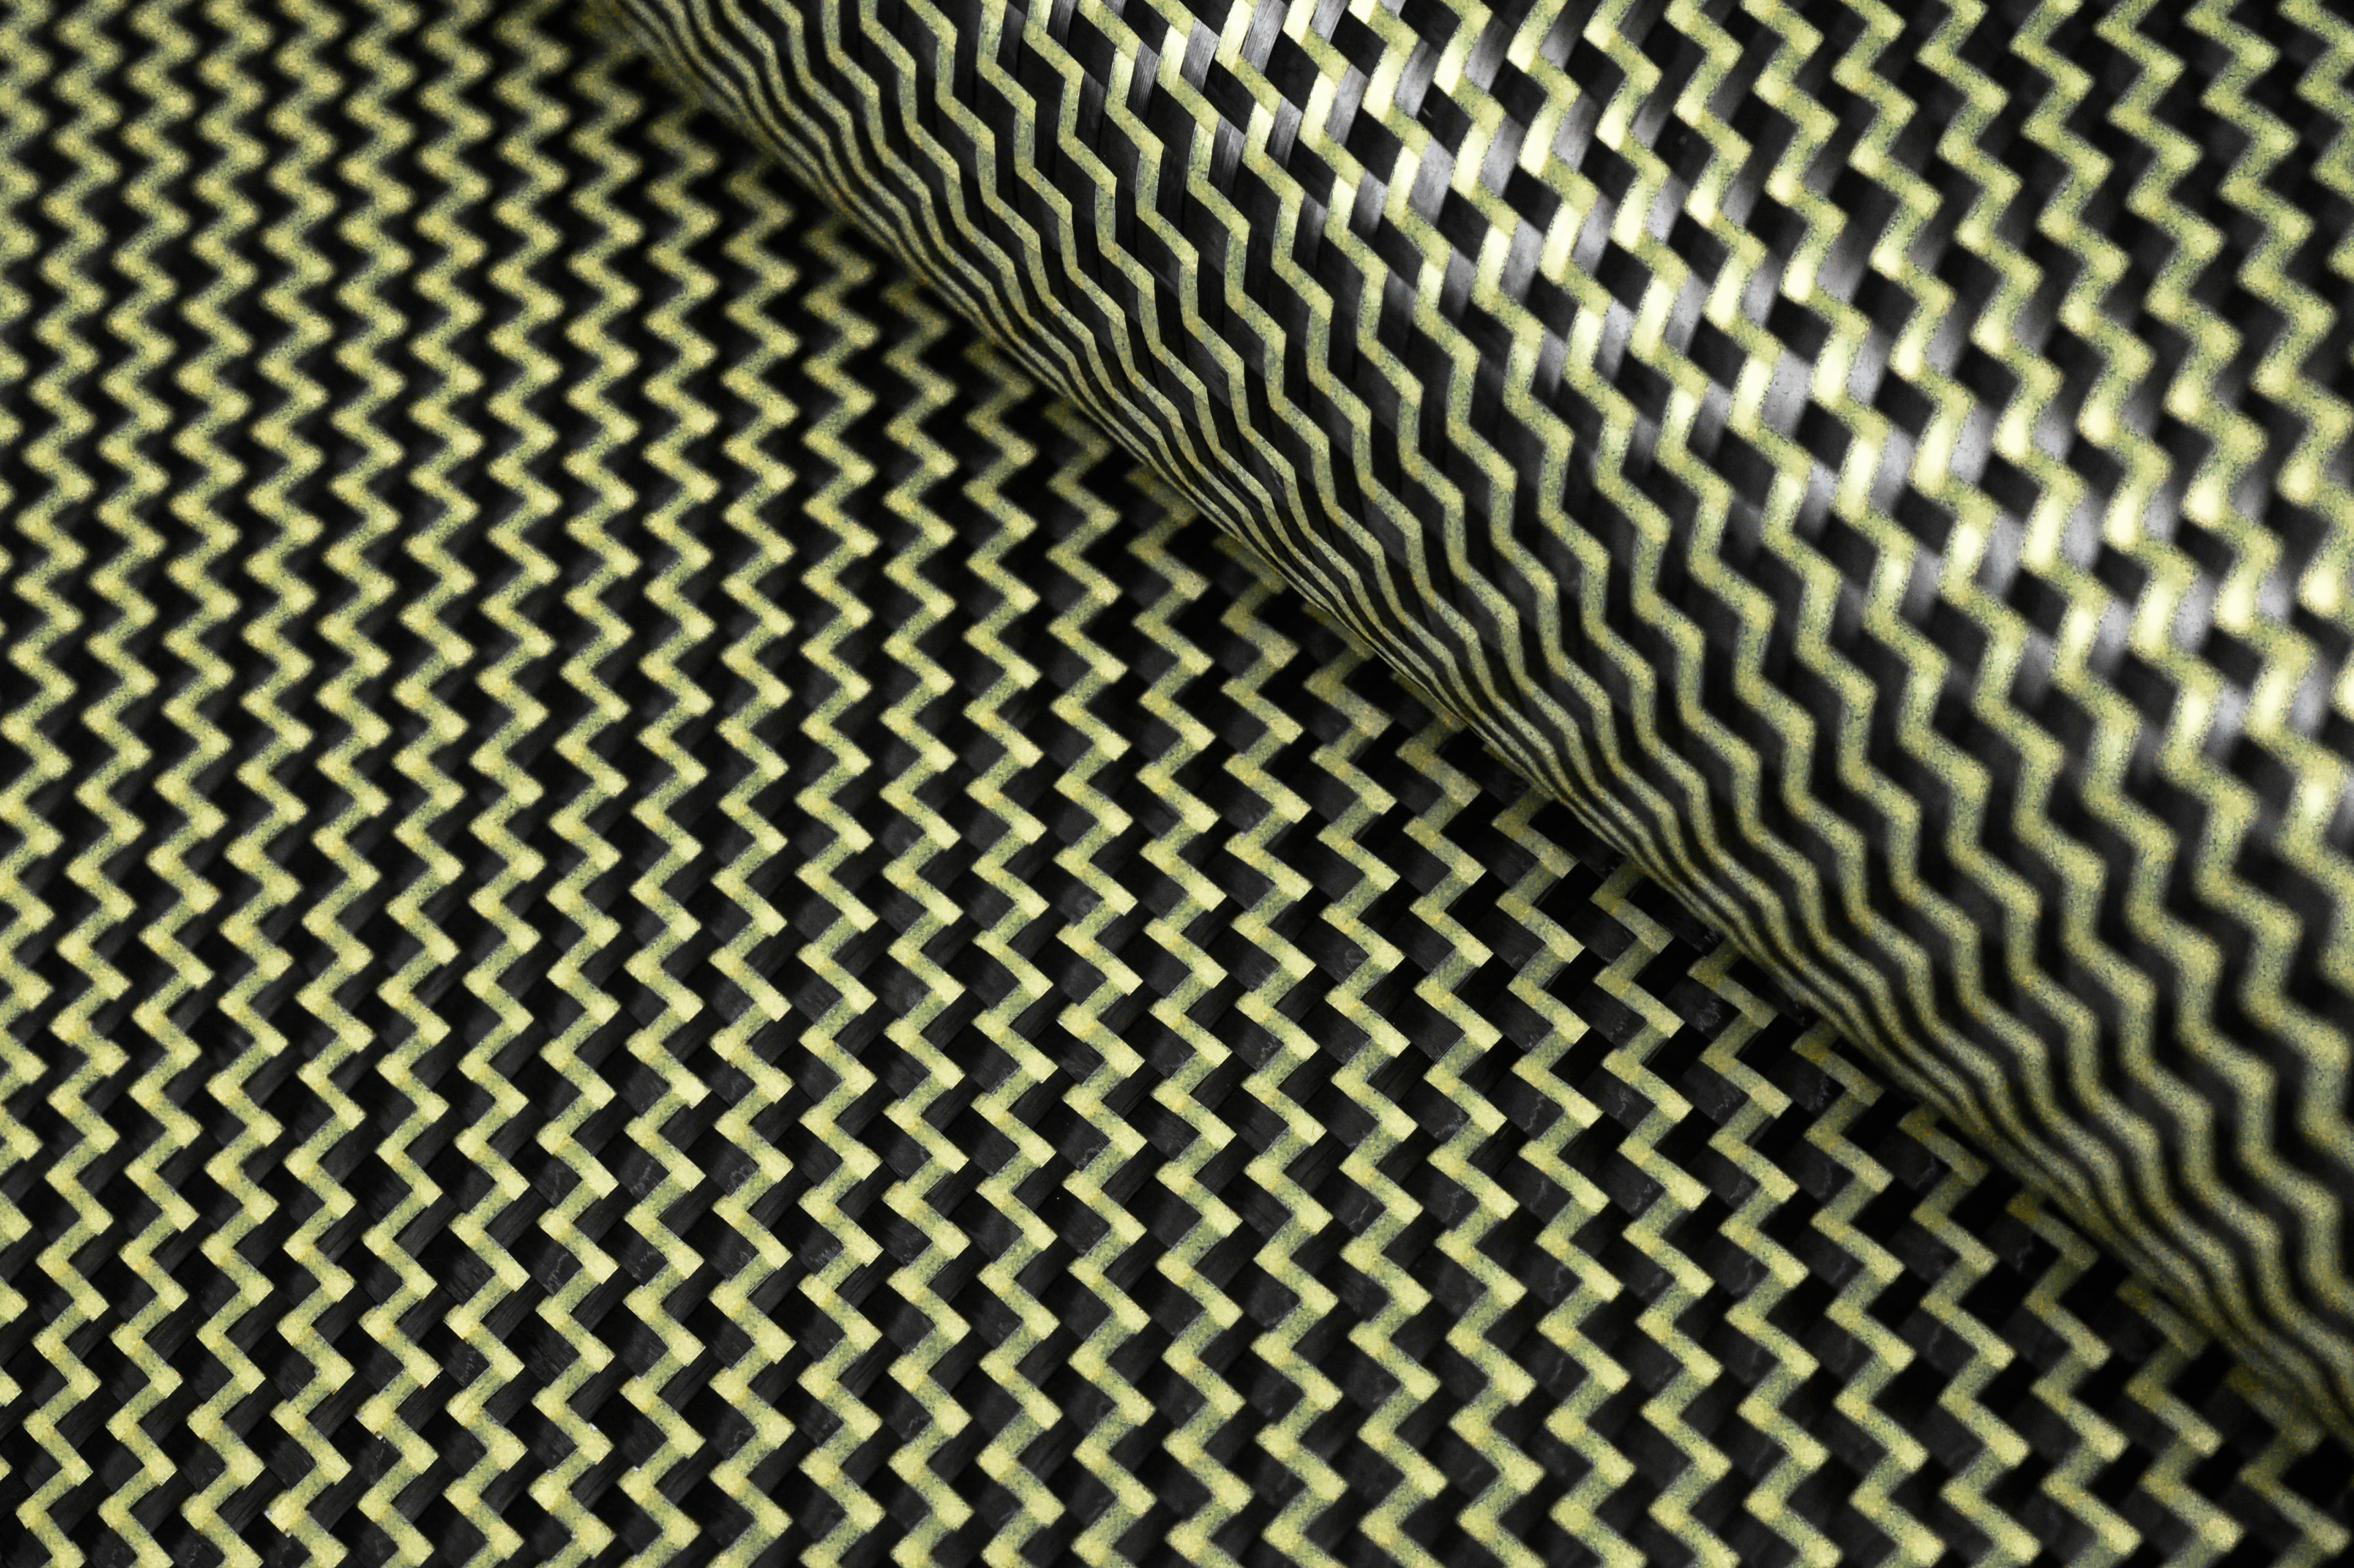 High-Quality Carbon Fiber Vinyl Upholstery Fabric for Modern Spaces